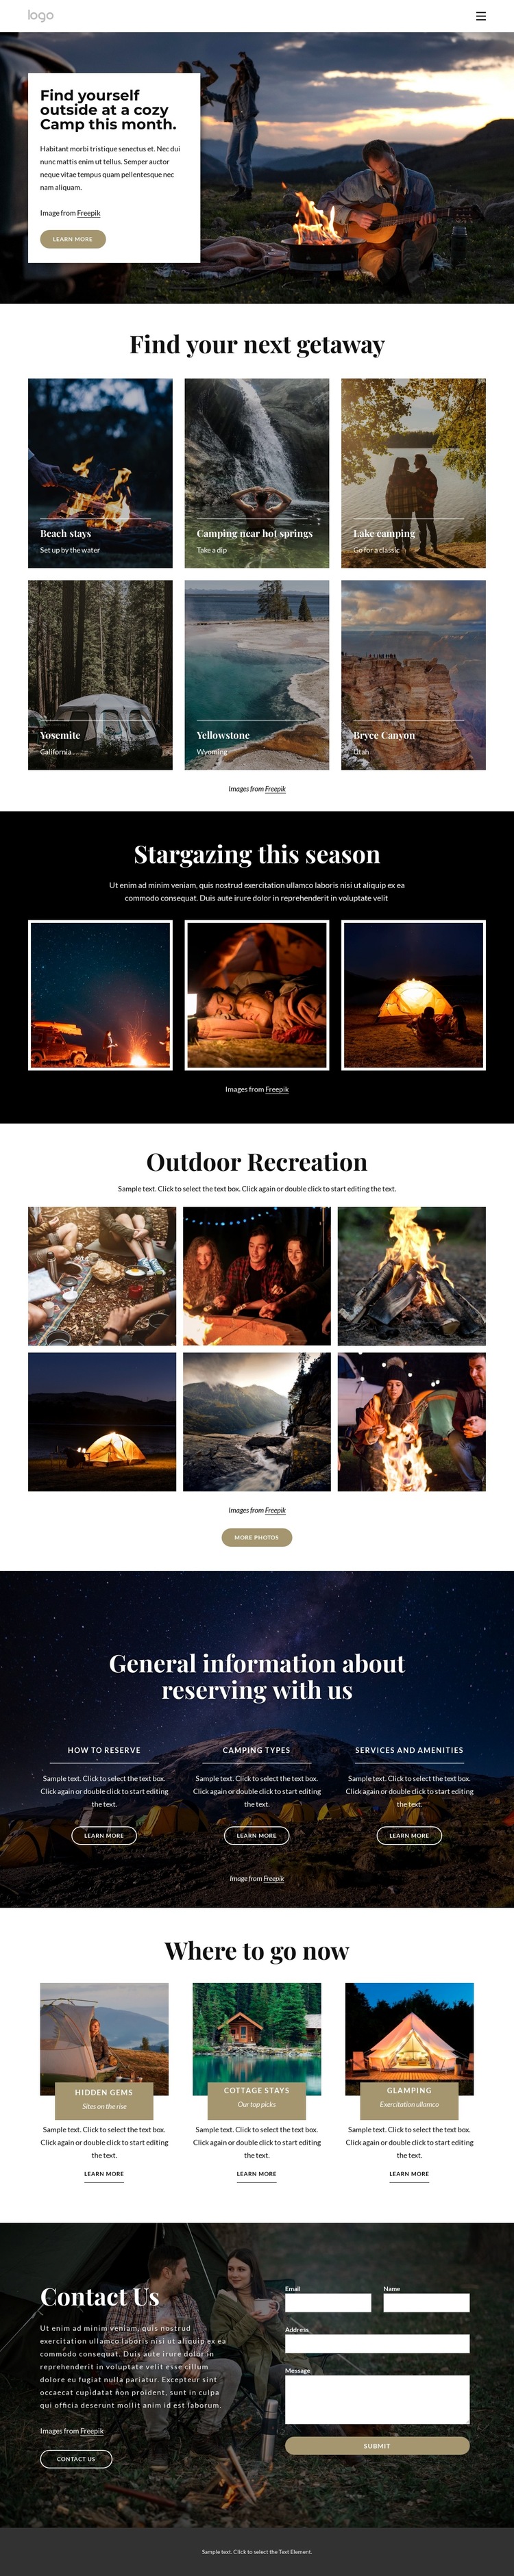 Going on a camping trip HTML5 Template